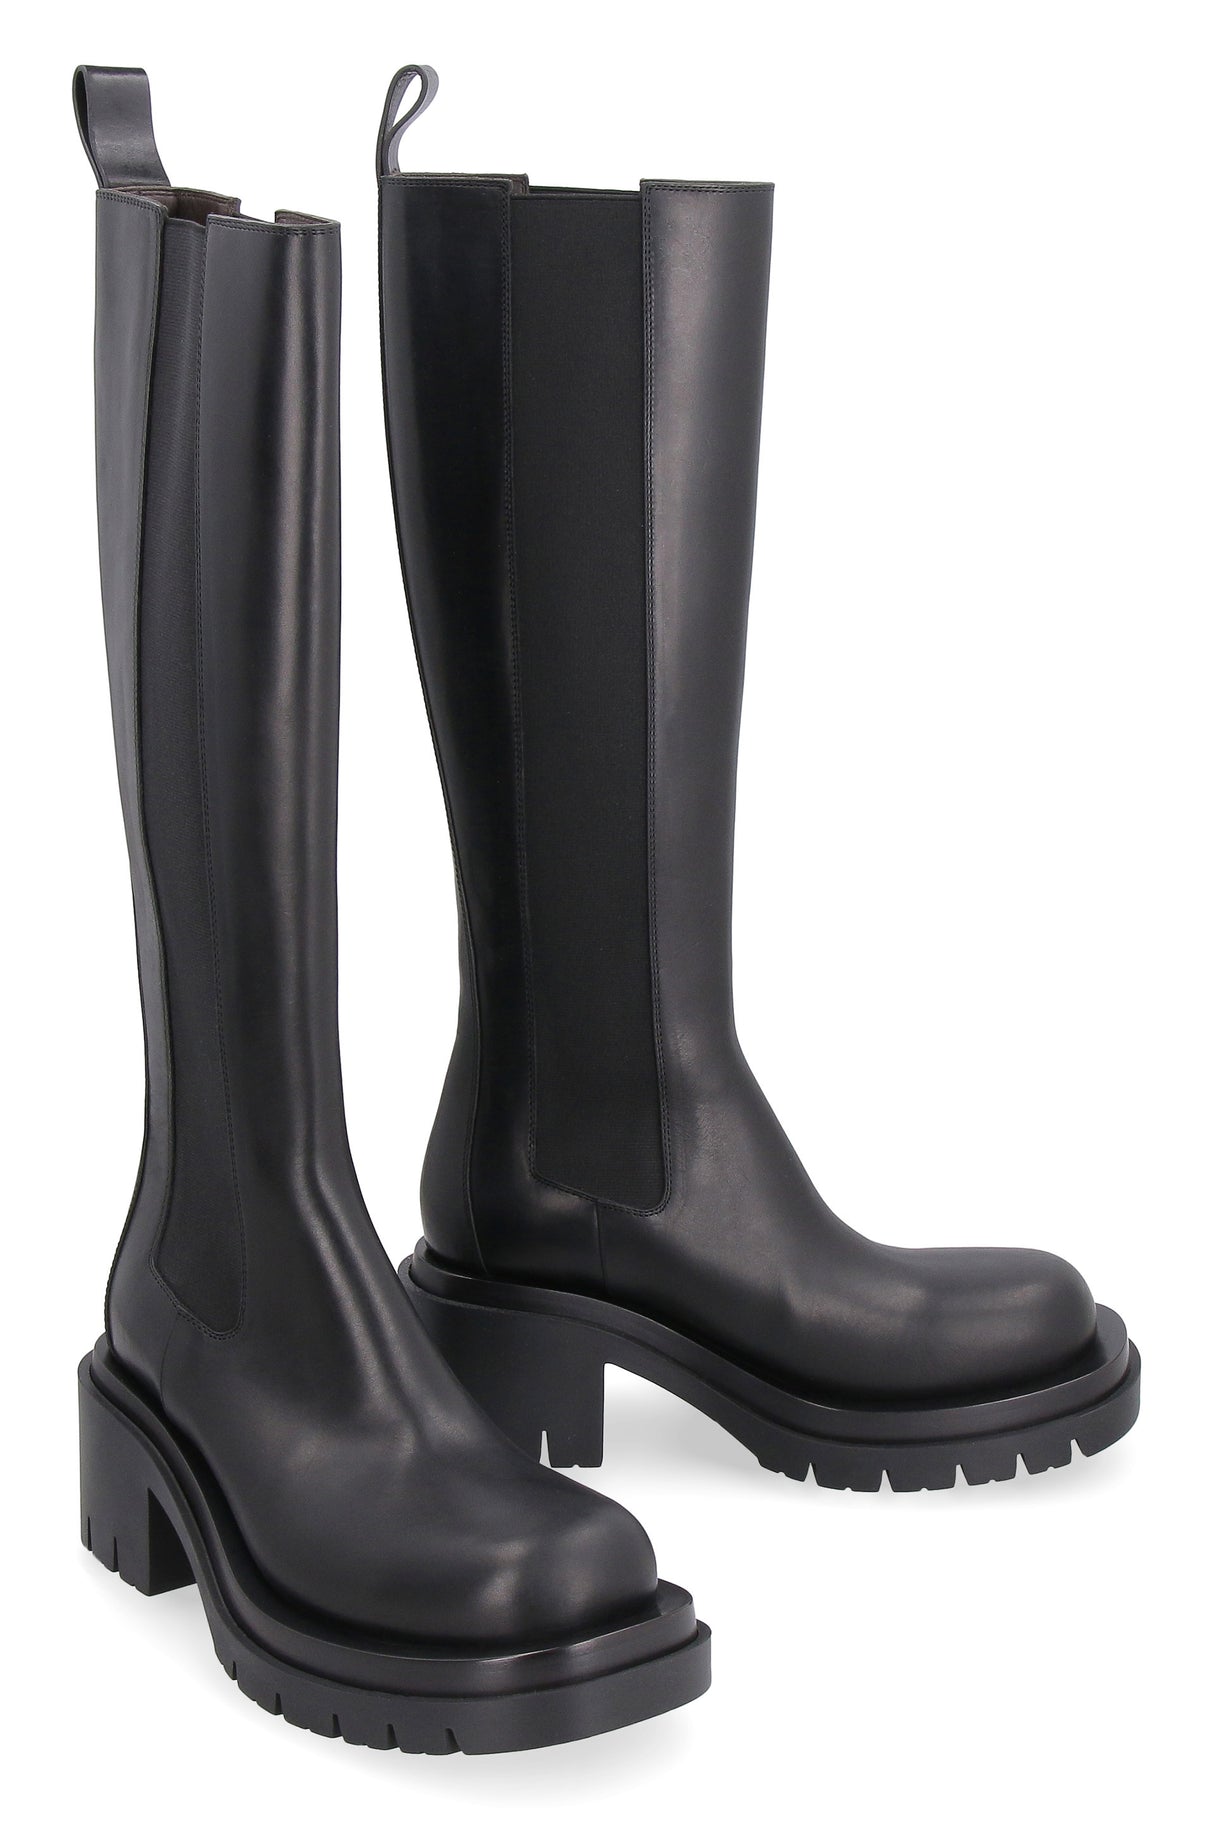 Sleek Black Leather Boots for Women - FW22 Collection